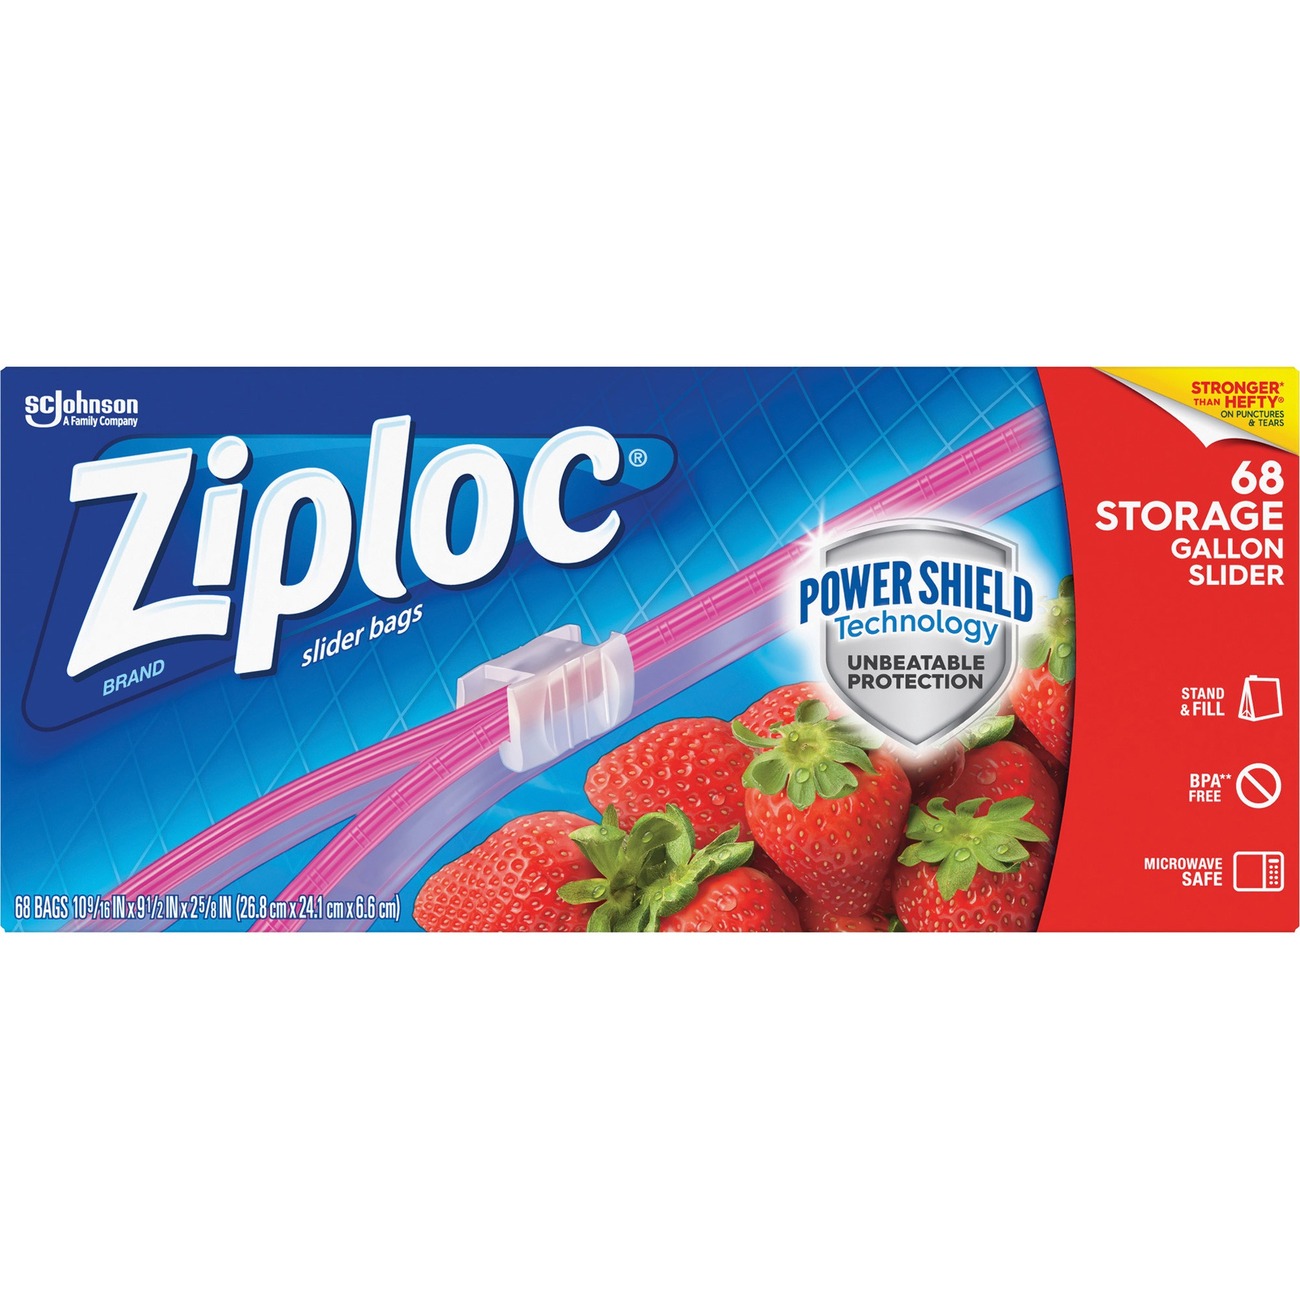 Get the most recent Ziploc® Big Bags (Large Size - 11.36 L - 15 (381 mm)  Width x 15 (381 mm) Length - Plastic - 5/Box - Multipurpose) (jit)  SPRICHARDS at great prices